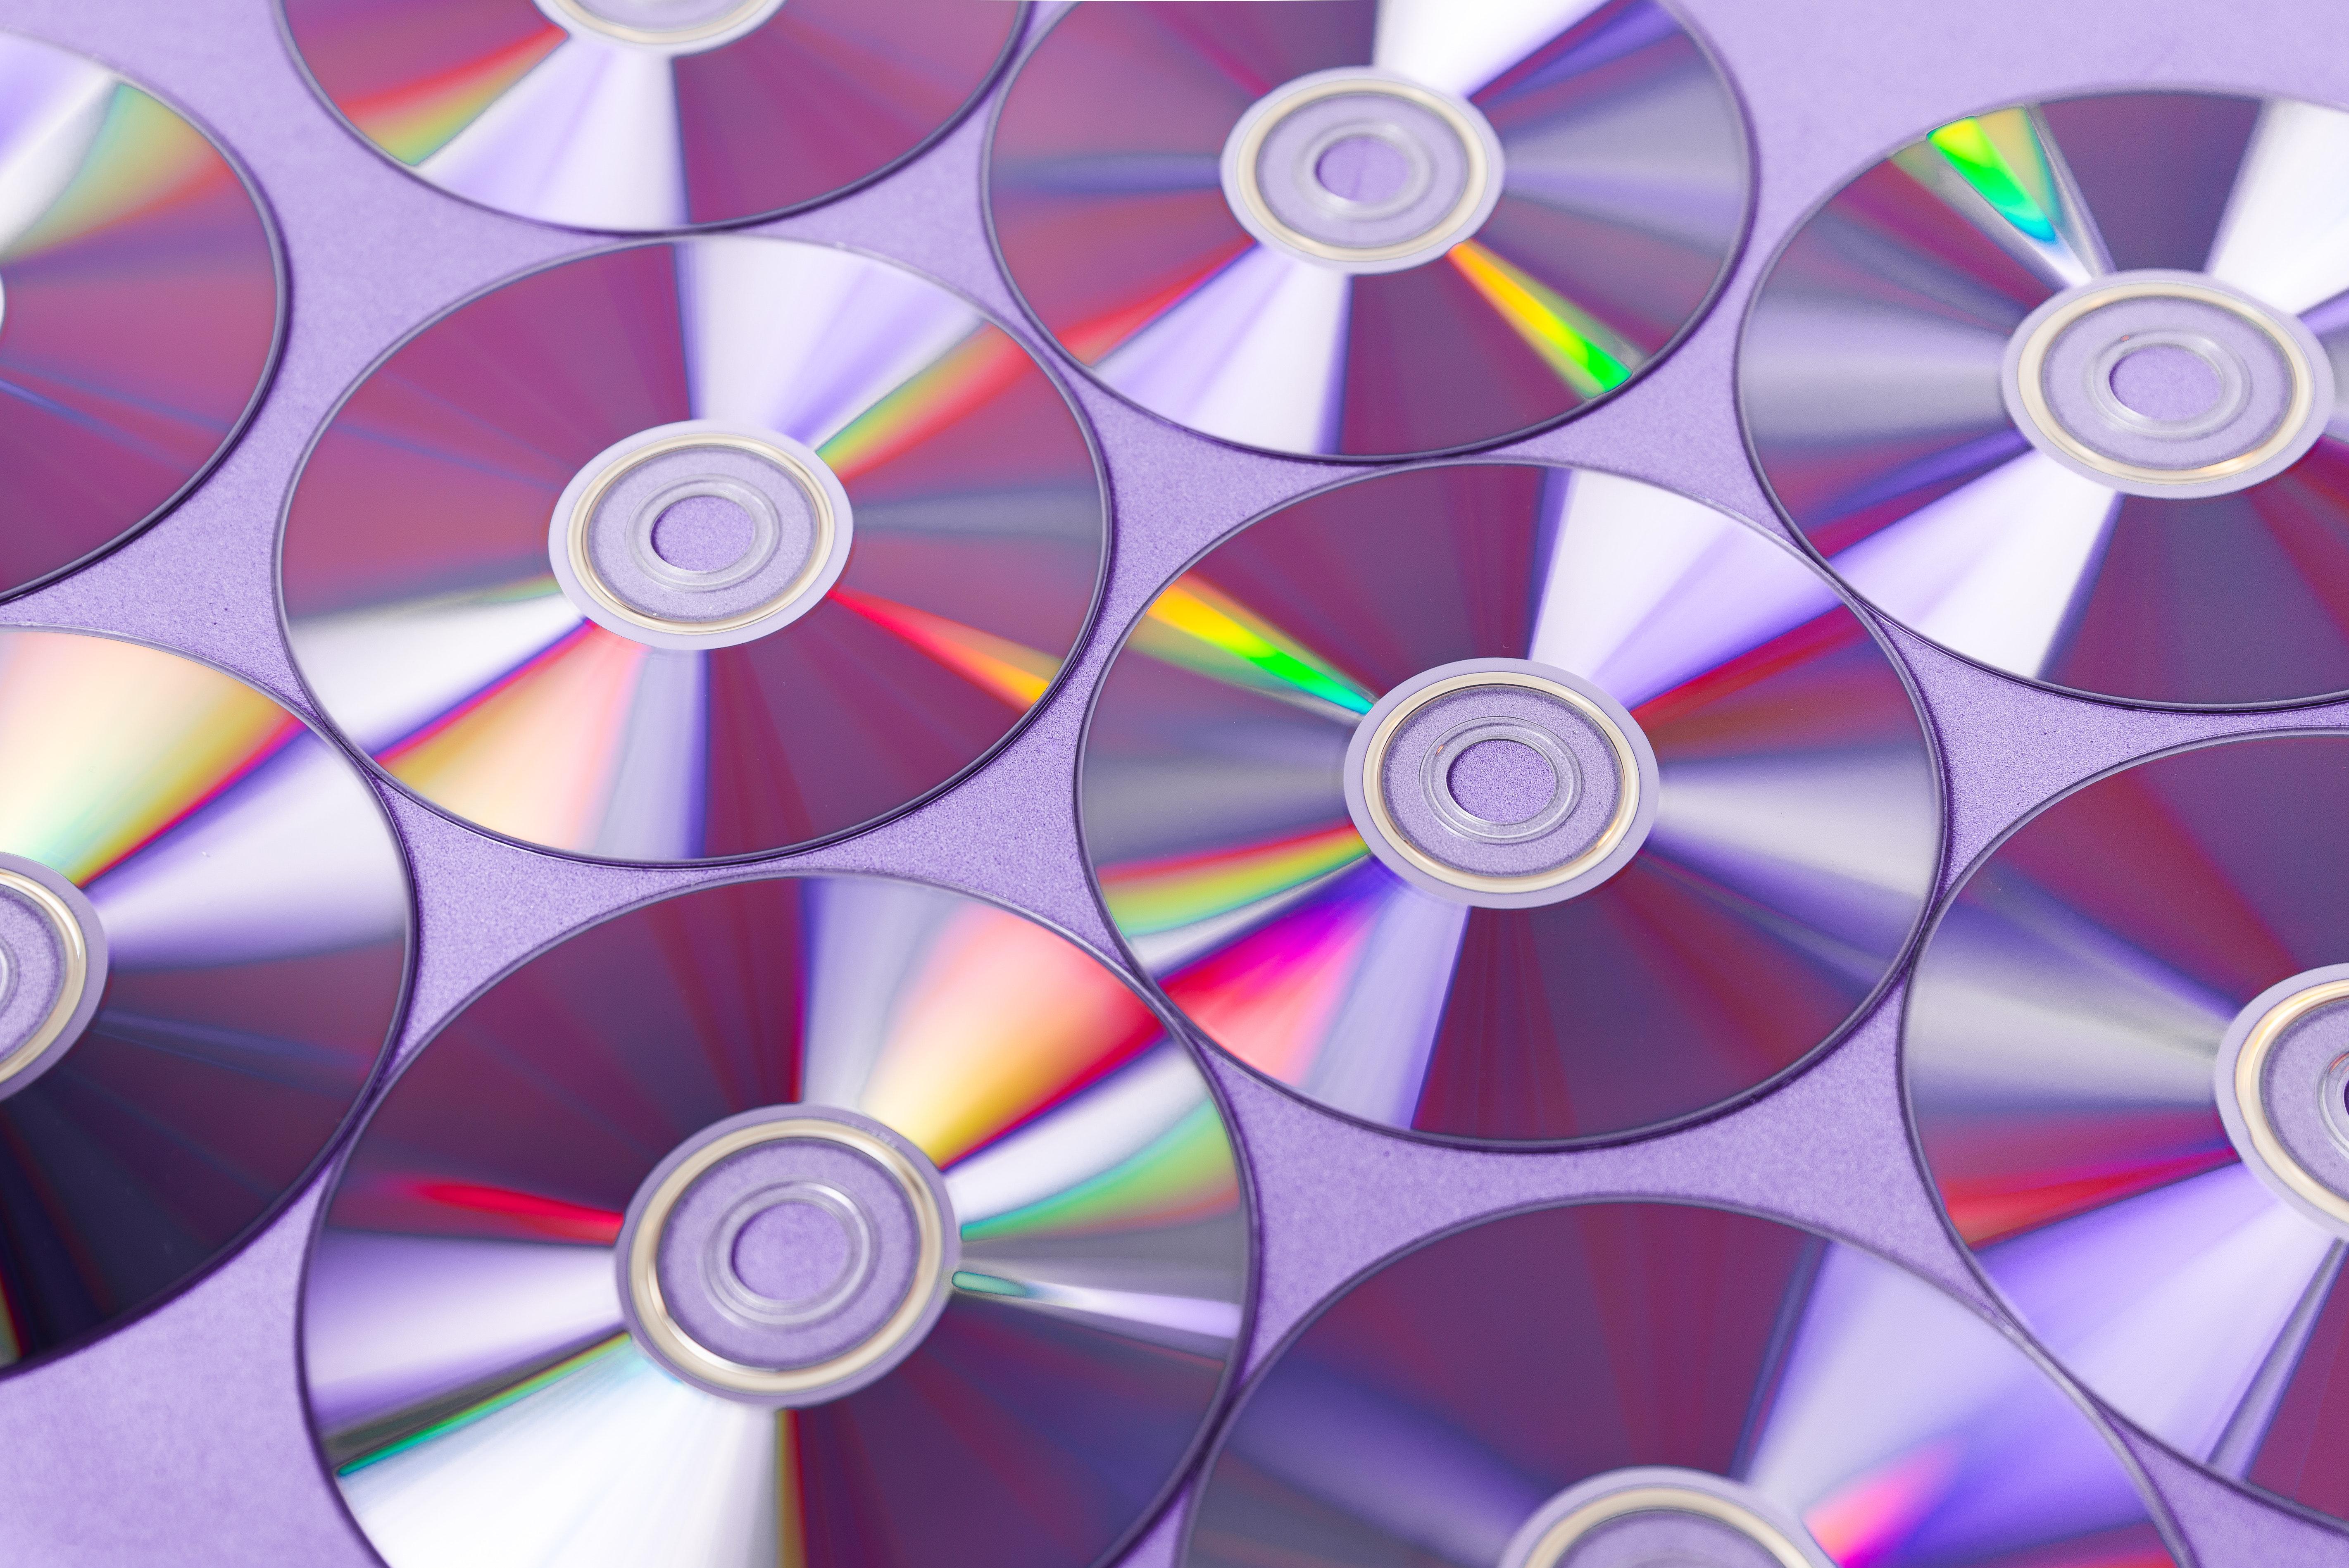 How To Get Pictures Off A Cd Without A Computer 